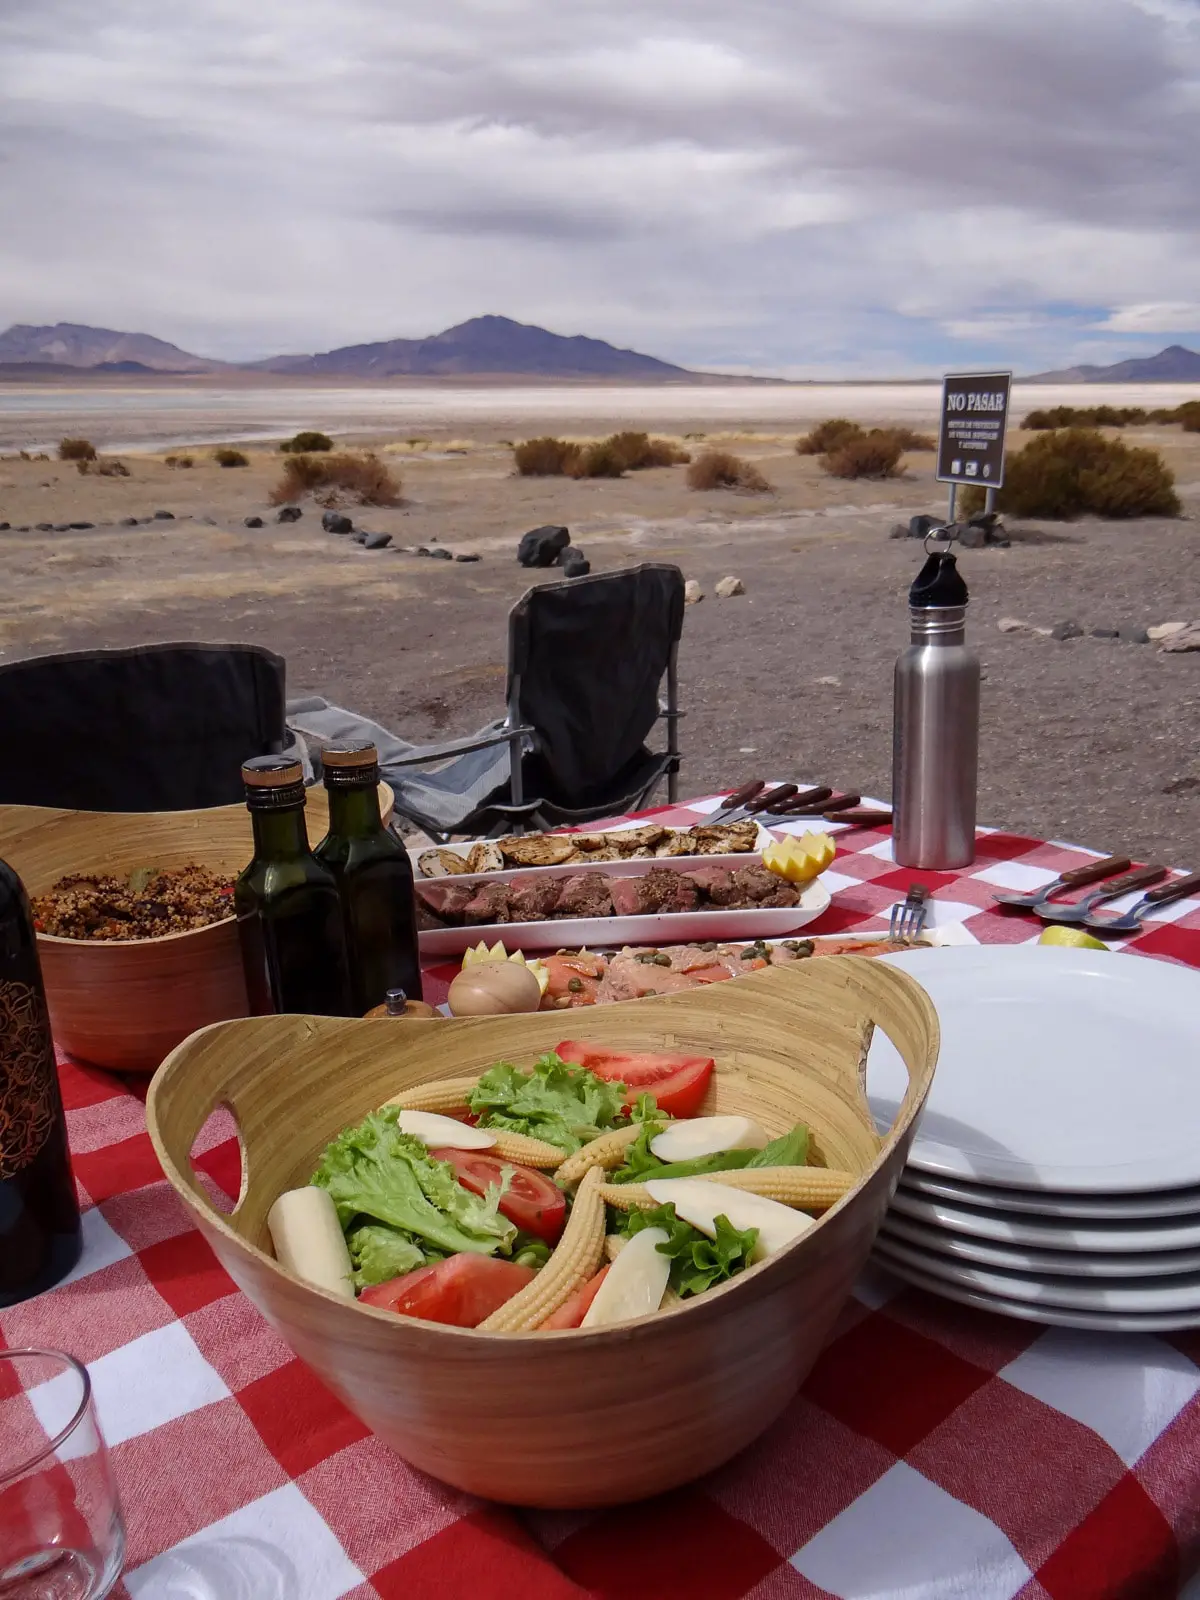 Picture of table with salad on the foreground and other meat dishes, set in front of a salt flat in the Atacama Desert